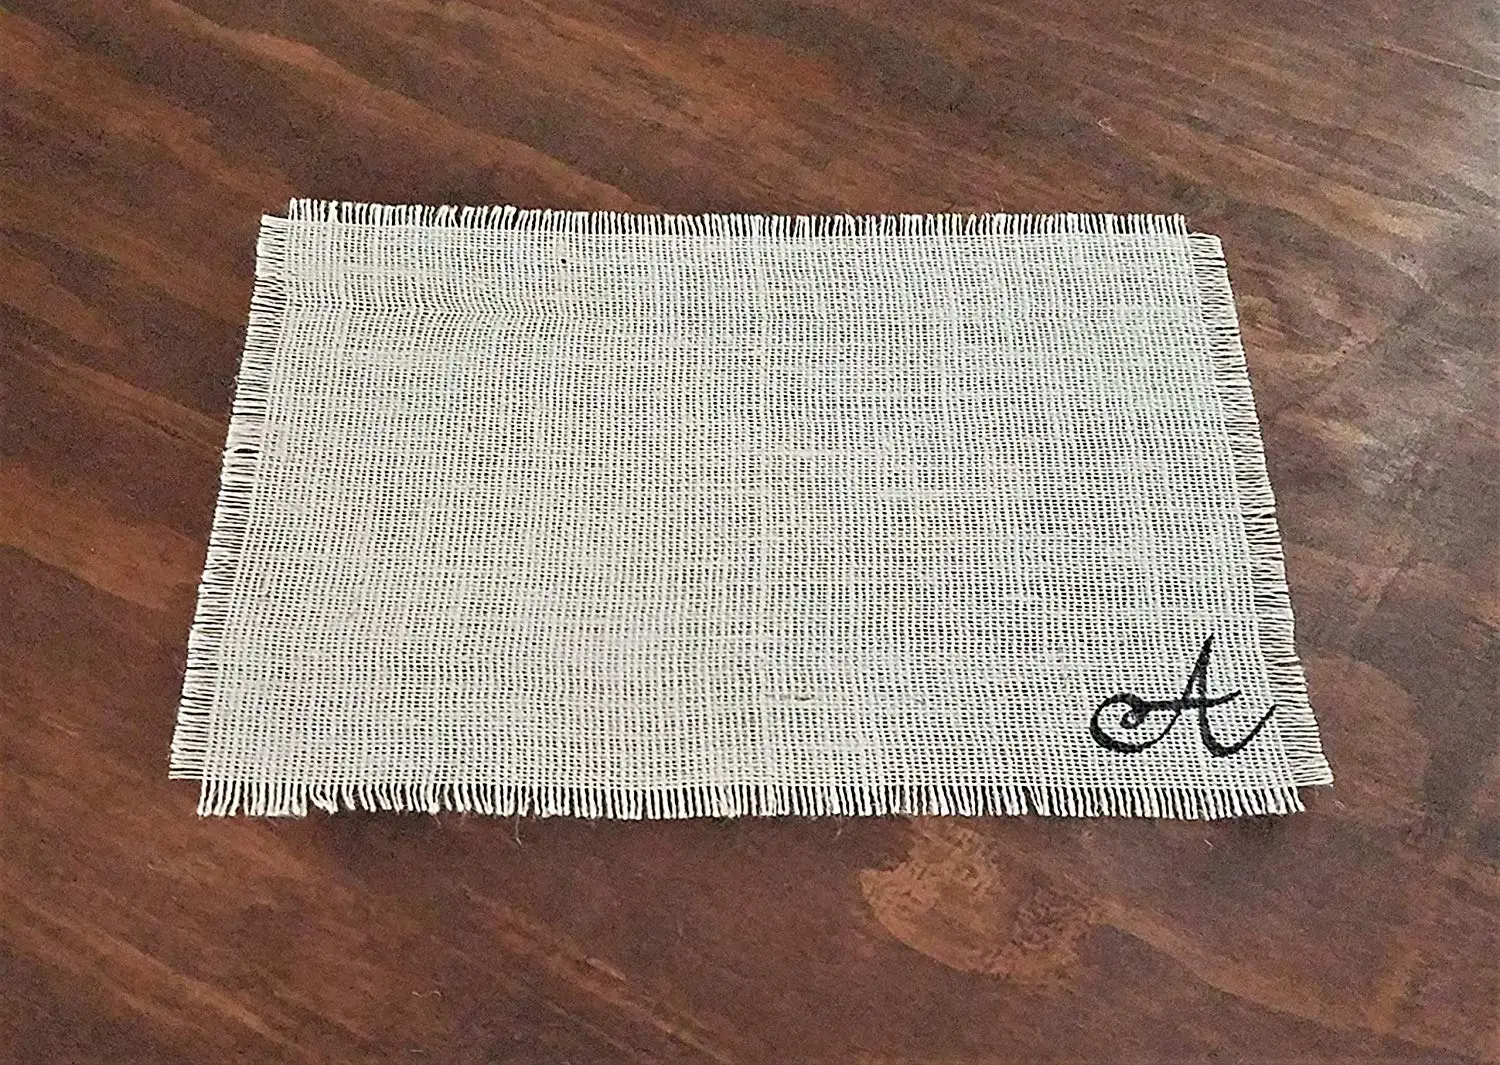 Rustic Paper Placemats Printed Burlap Paper Placemats Book of 25 17 x 11 inches Tear-Off Pad Of Card Stock Paper